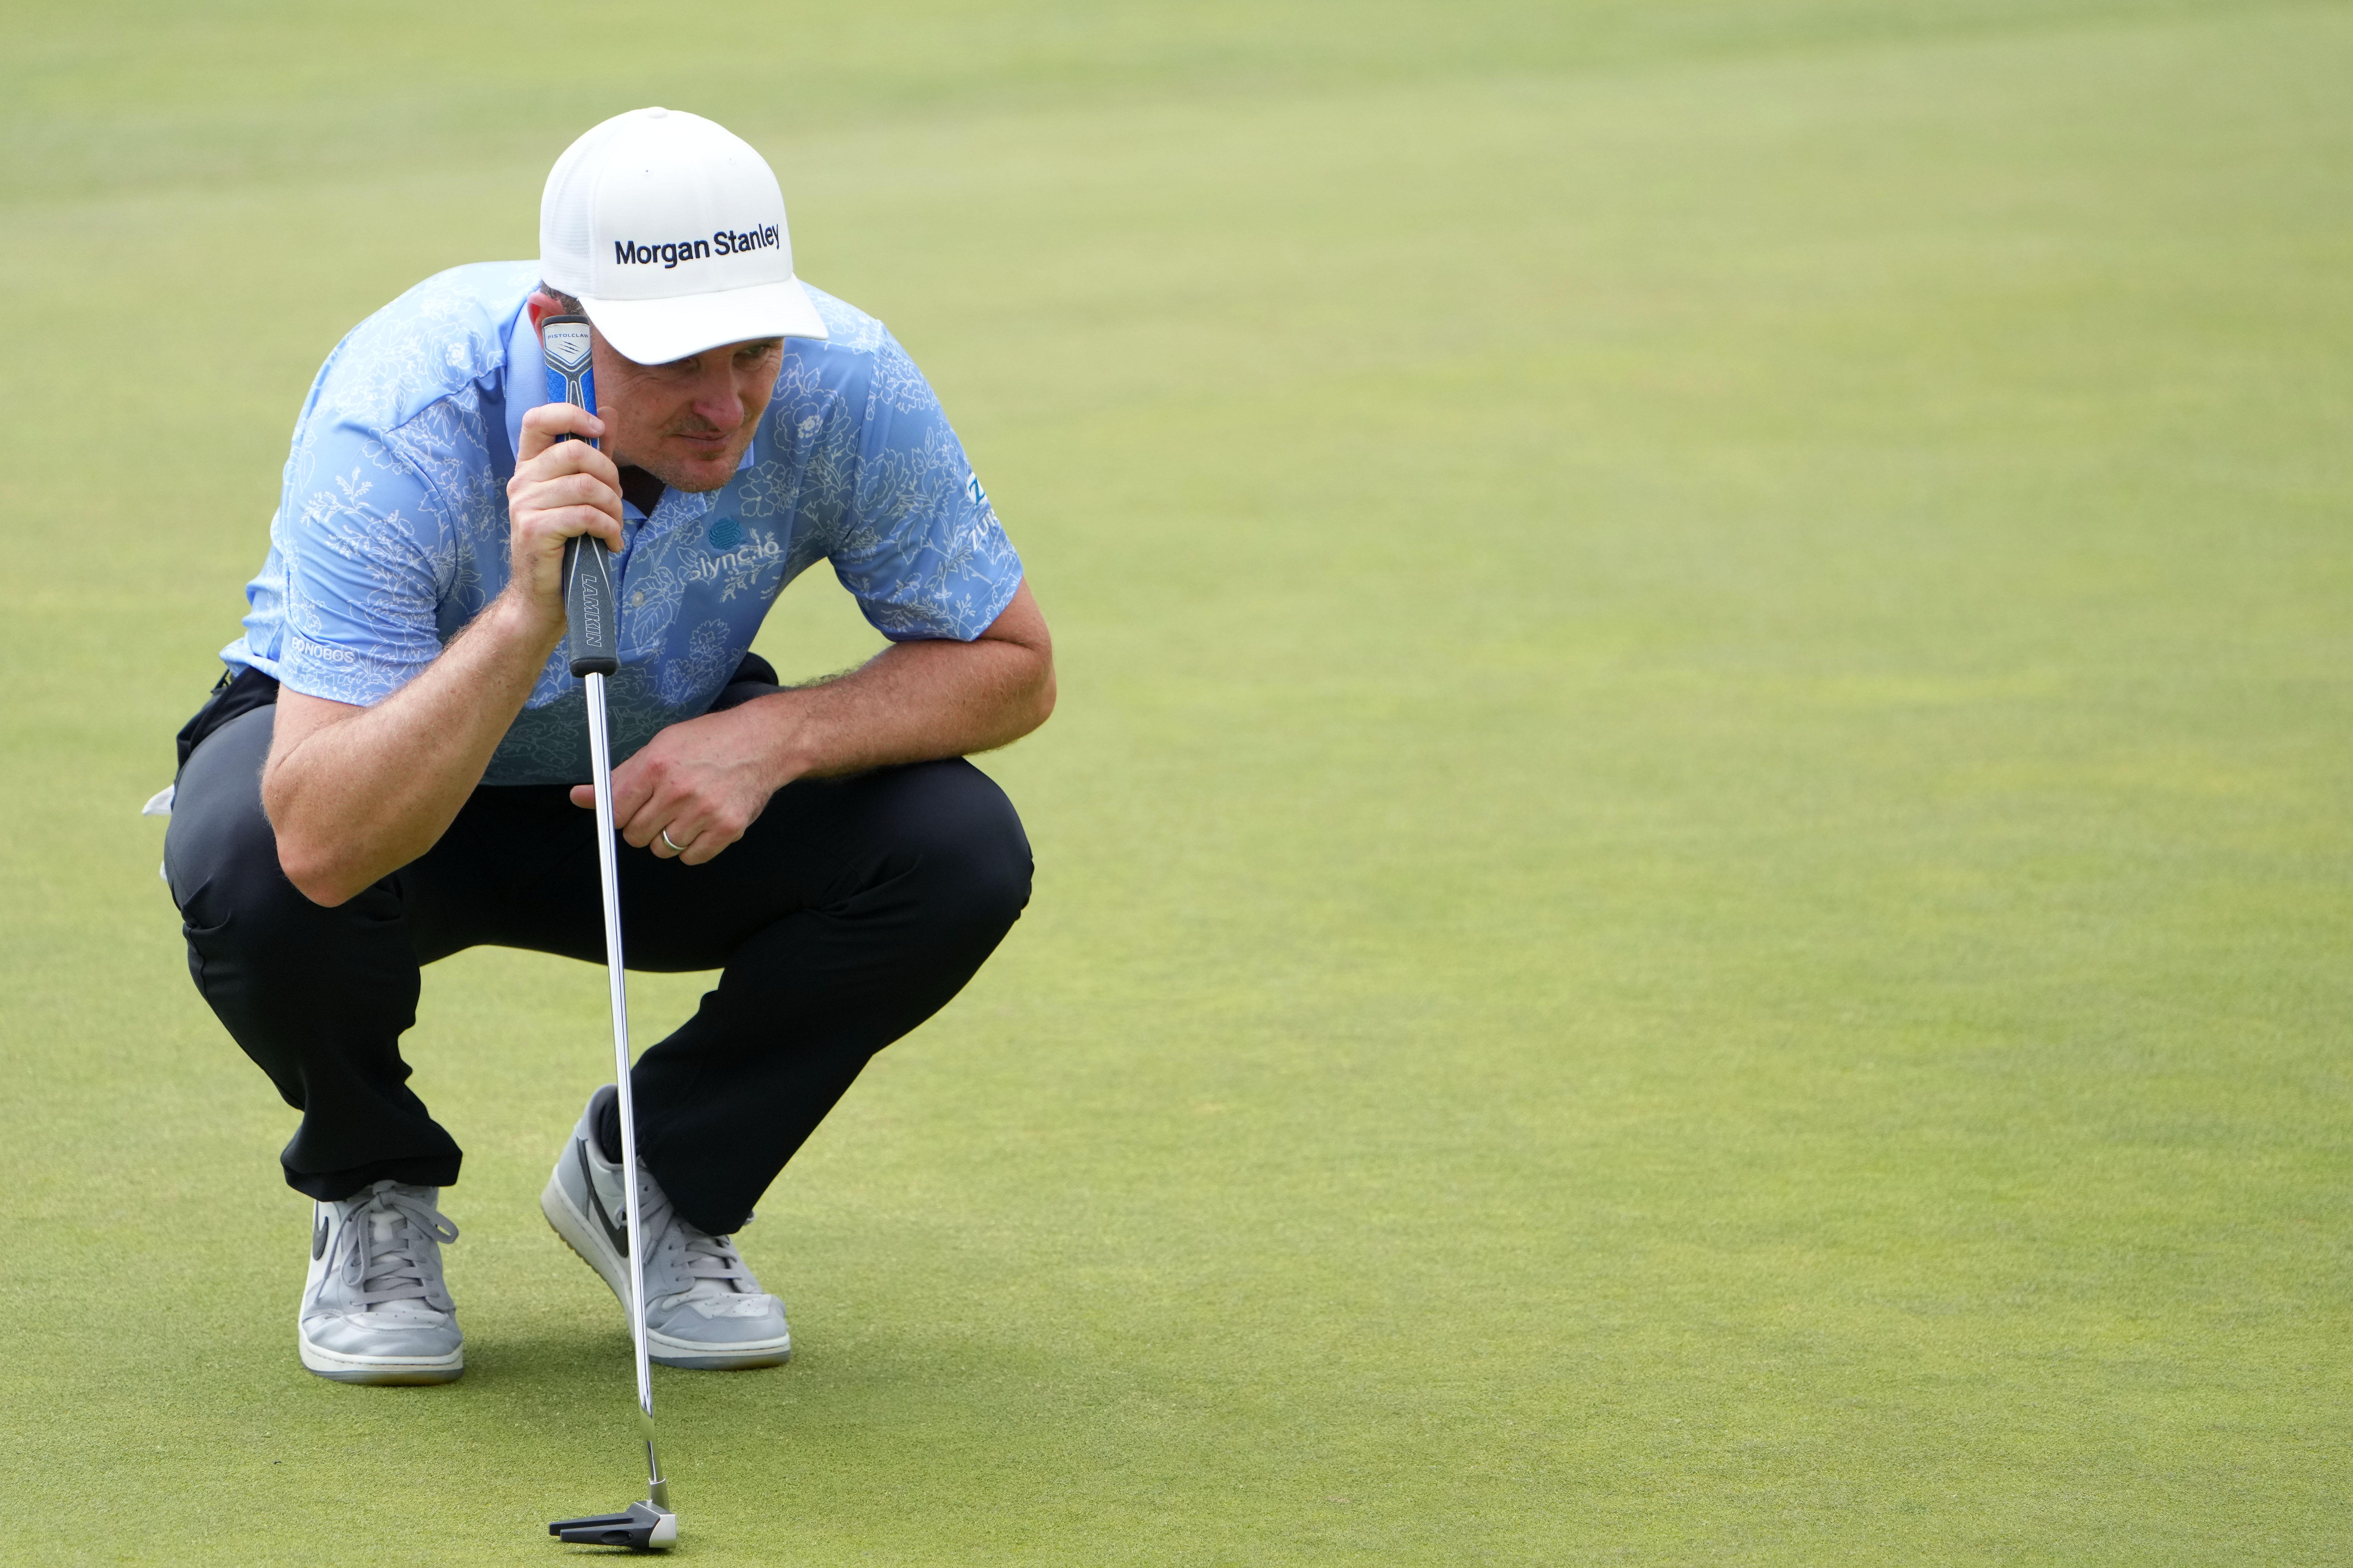 Justin Rose Open Championship 2022 Odds, History, Predictions & How to Watch